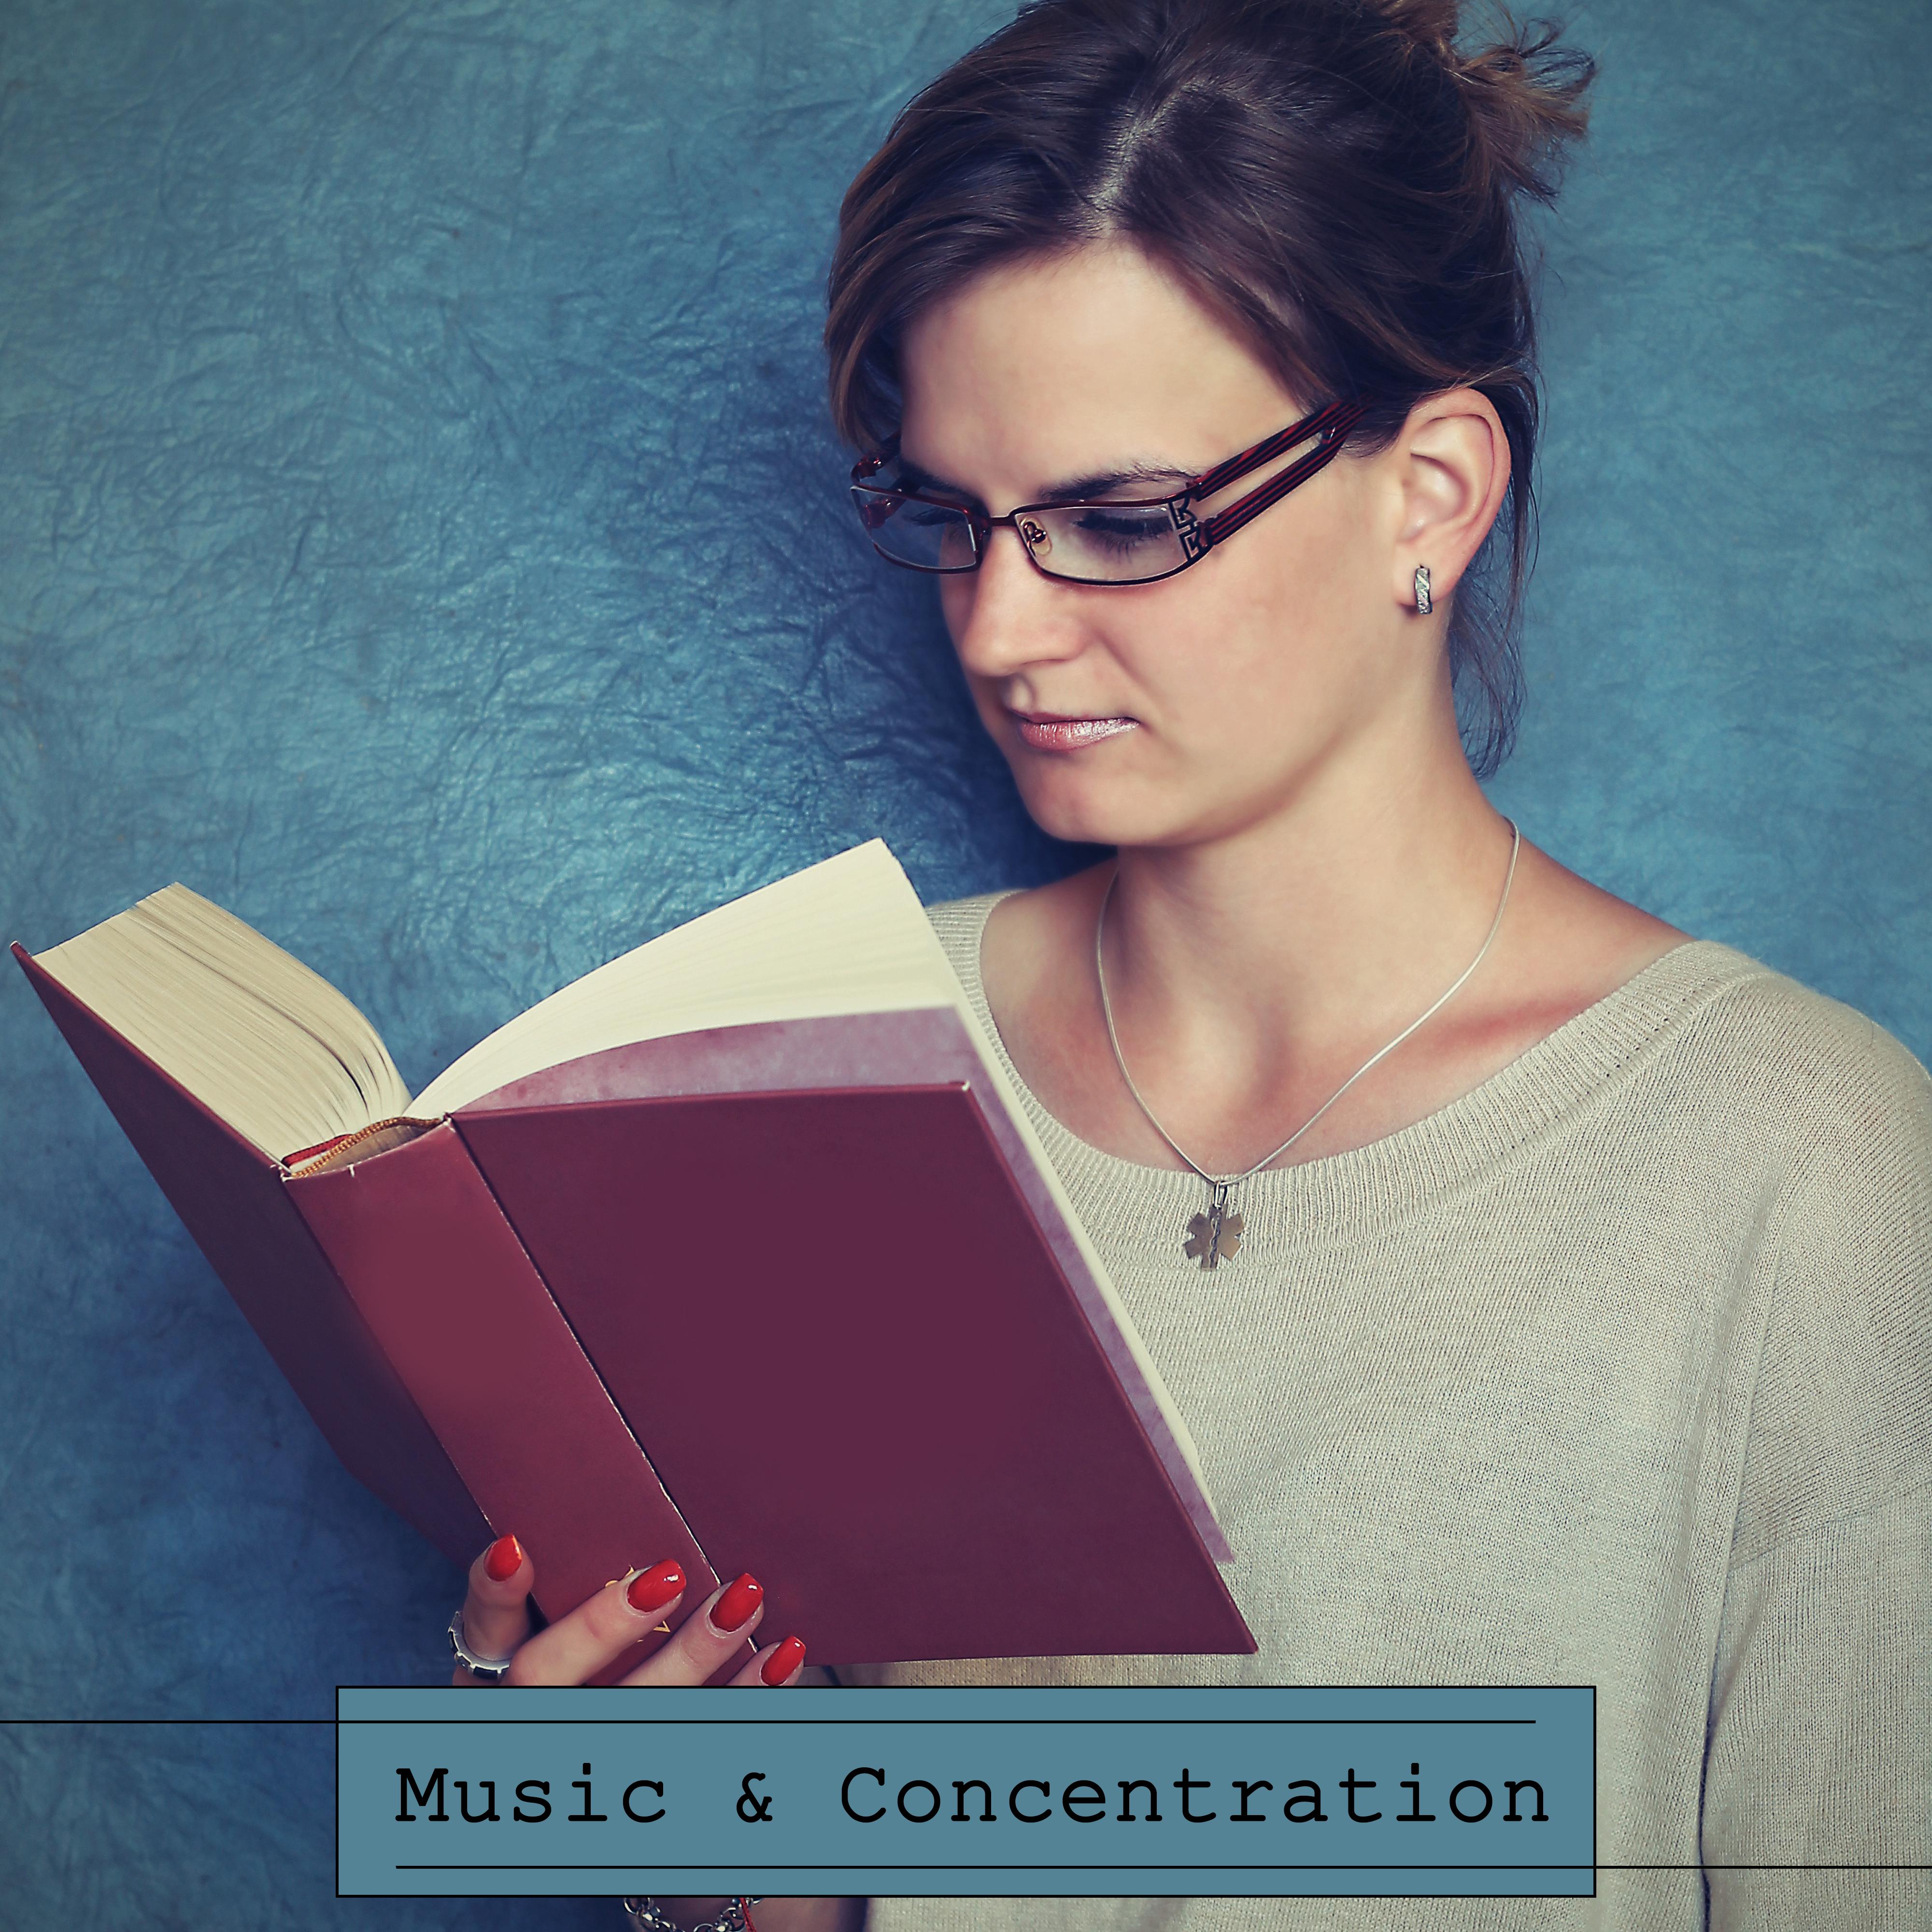 Music & Concentration – Classical Songs for Better Memory, Effective Study, Stress Relief, Easy Work with Mozart, Beethoven